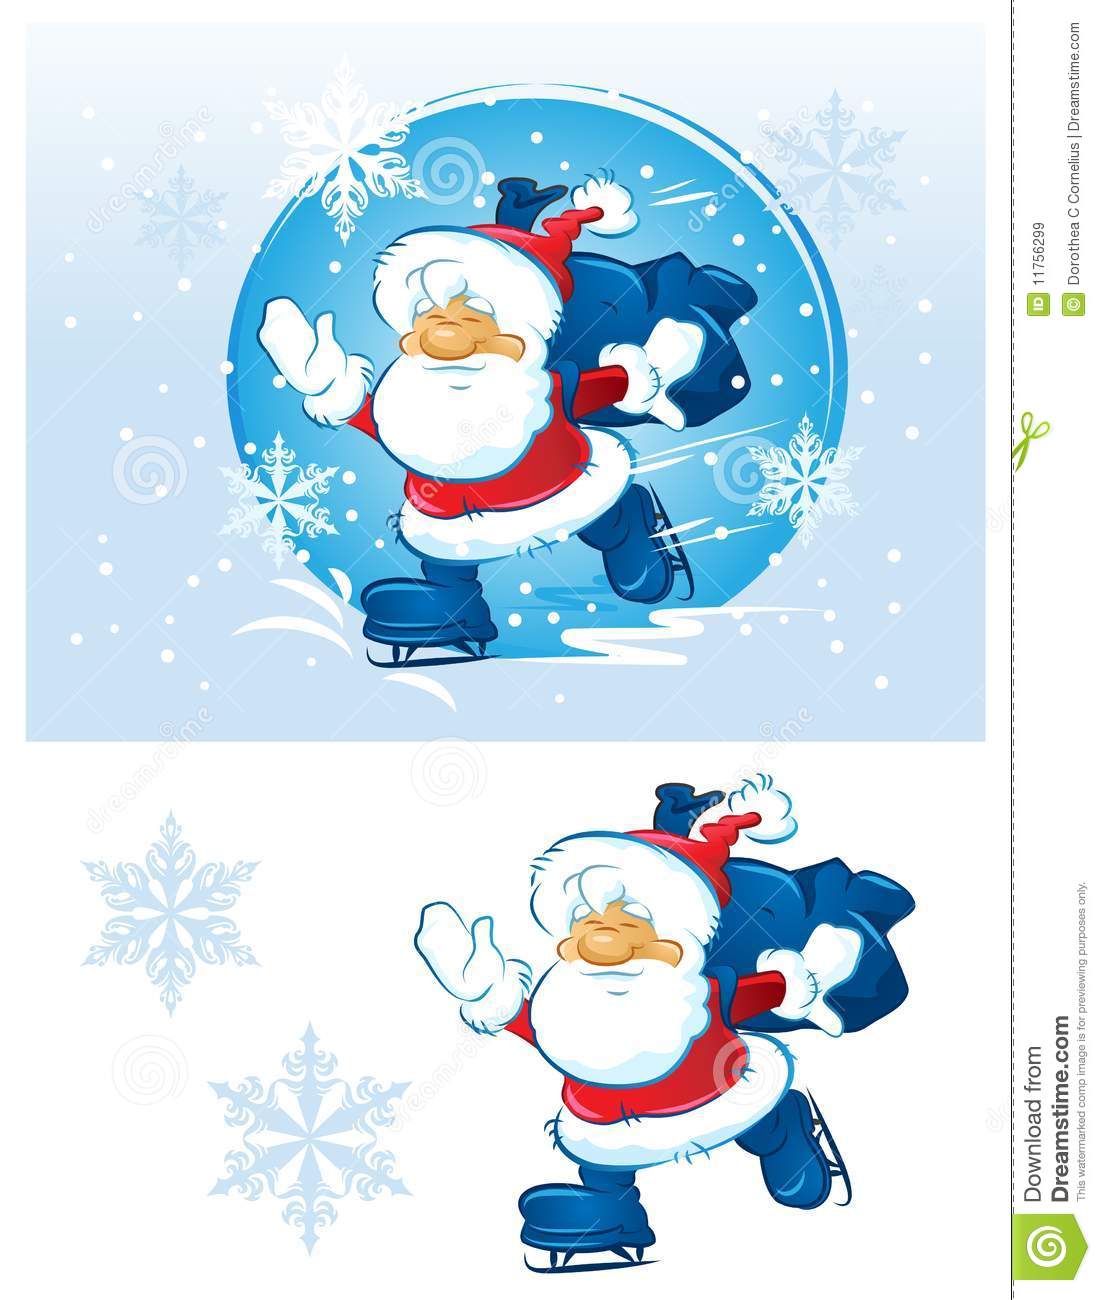 Santa Sliding On Ice  File Includes Clipping Path 